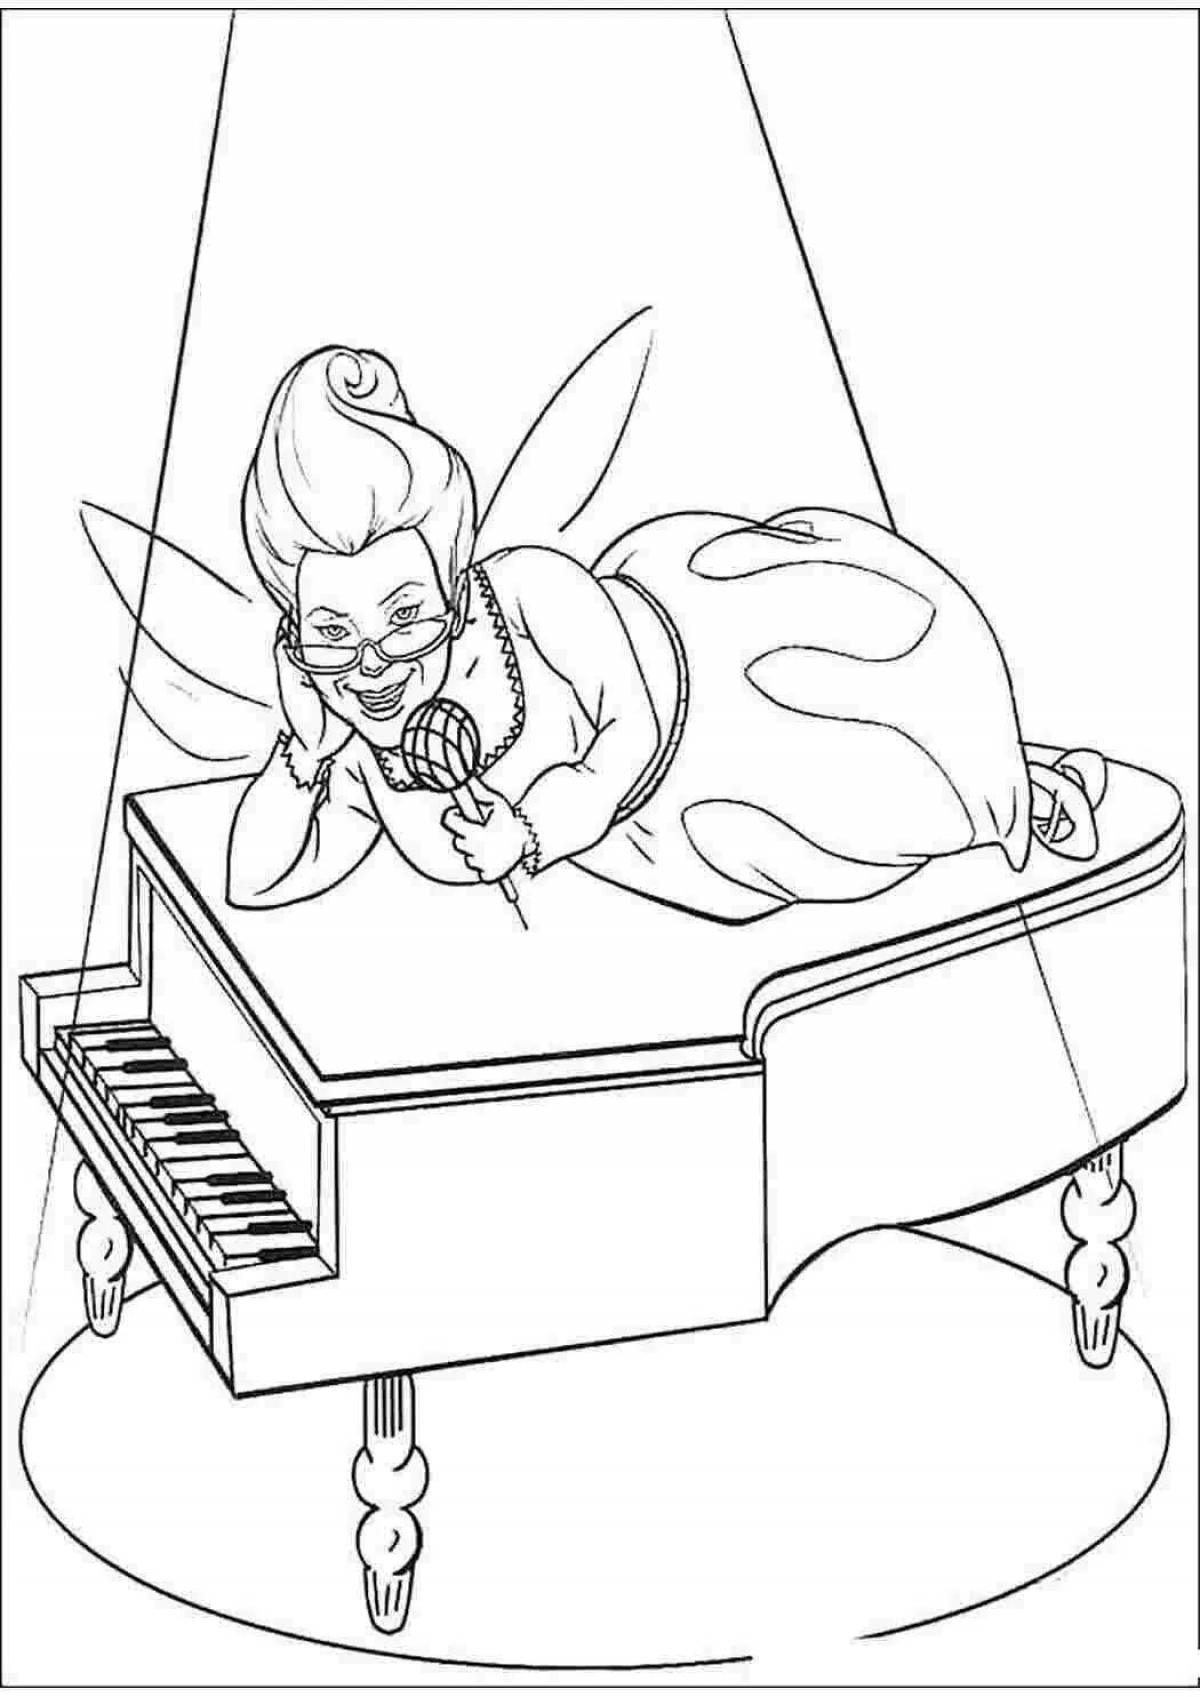 Colored piano coloring page for kids